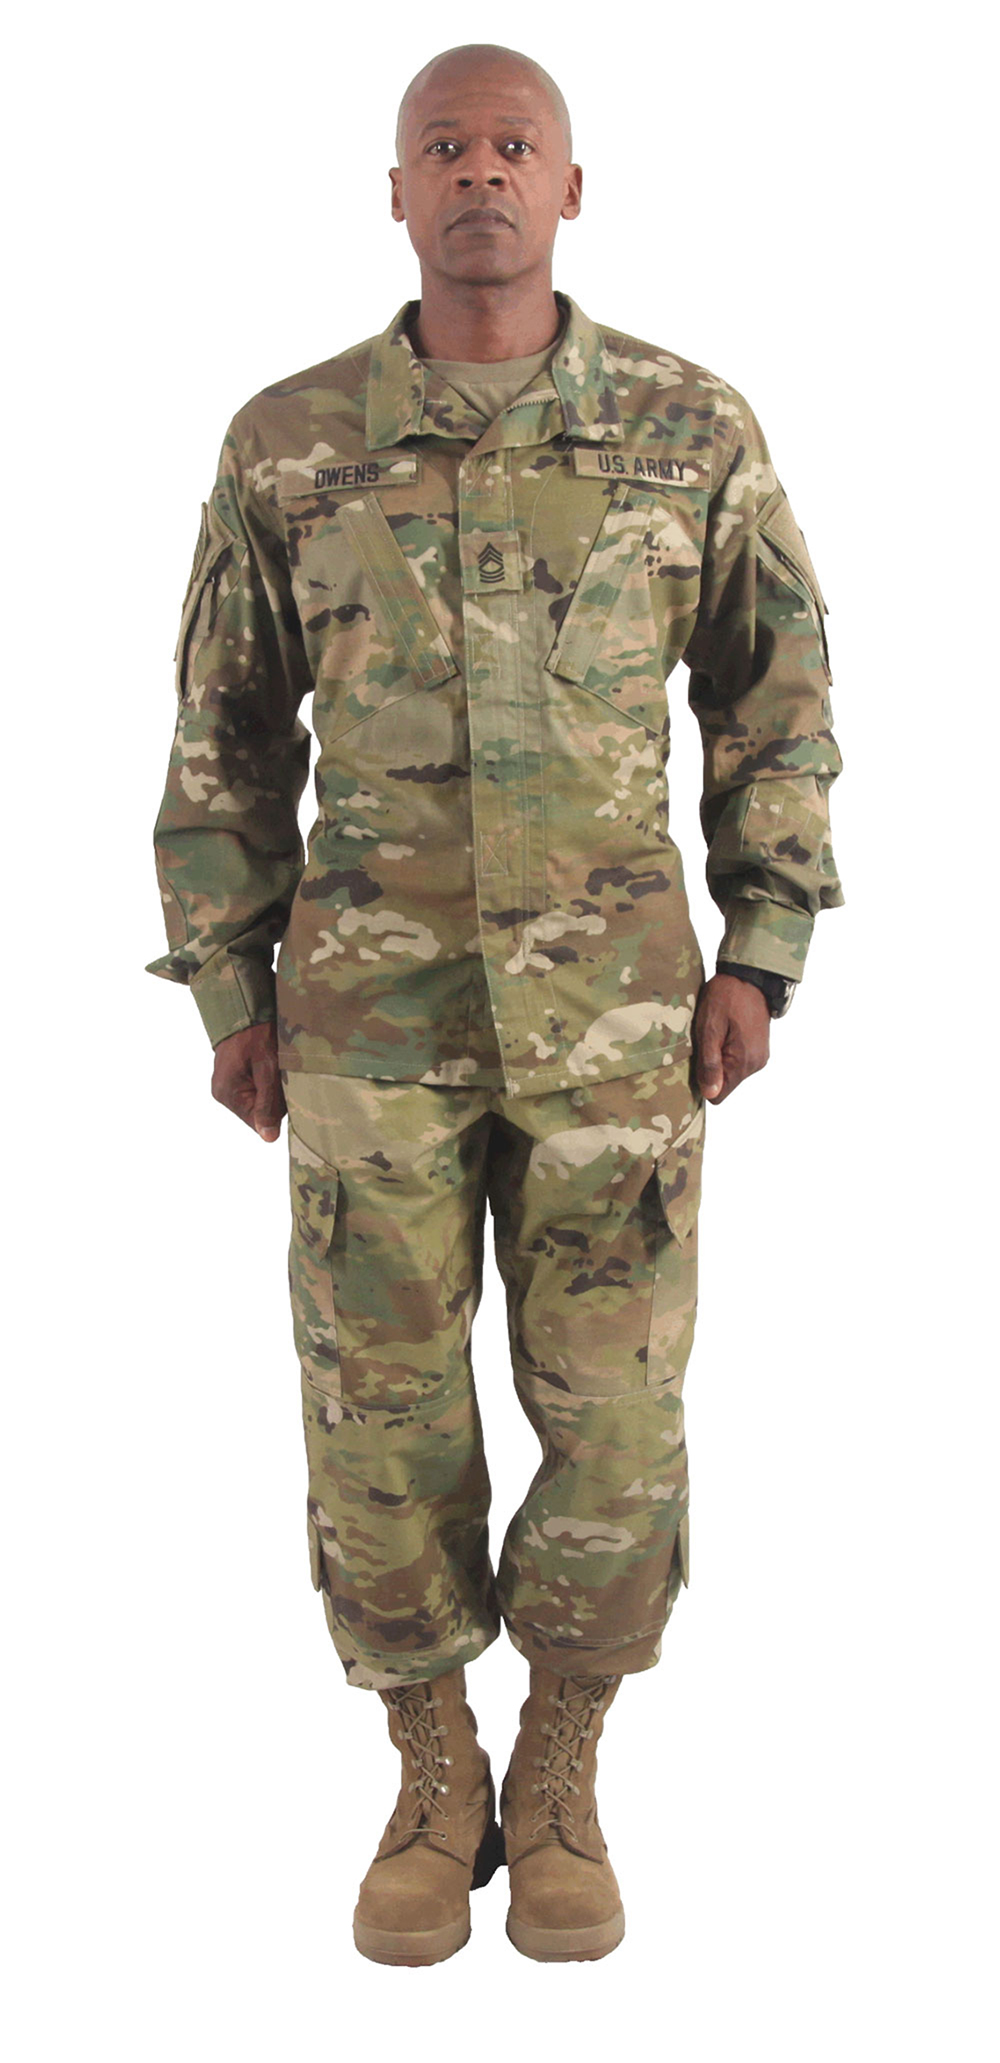 Beginning in the fall of 2015, the Army will begin issuing to new Soldiers an Army Combat Uniform that bears the Operational Camouflage Pattern. That same uniform will also become available in military clothing sales stores in the summer of 2015. (Photo courtesy of PEO Soldier)